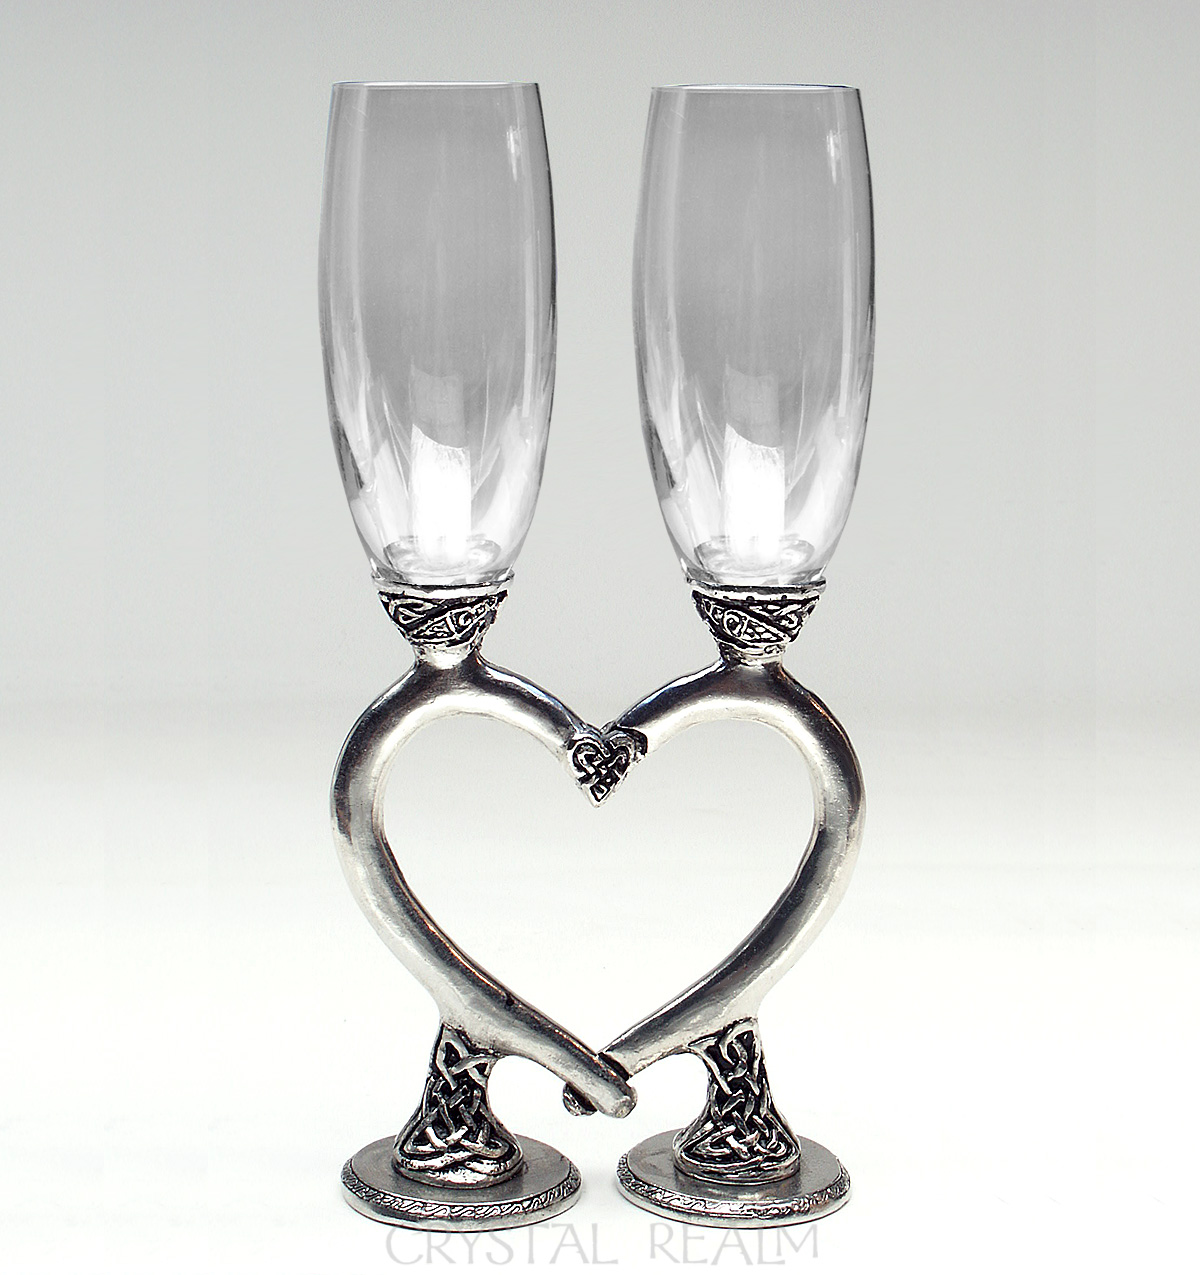 Clear toasting flutes with Celtic heart stems